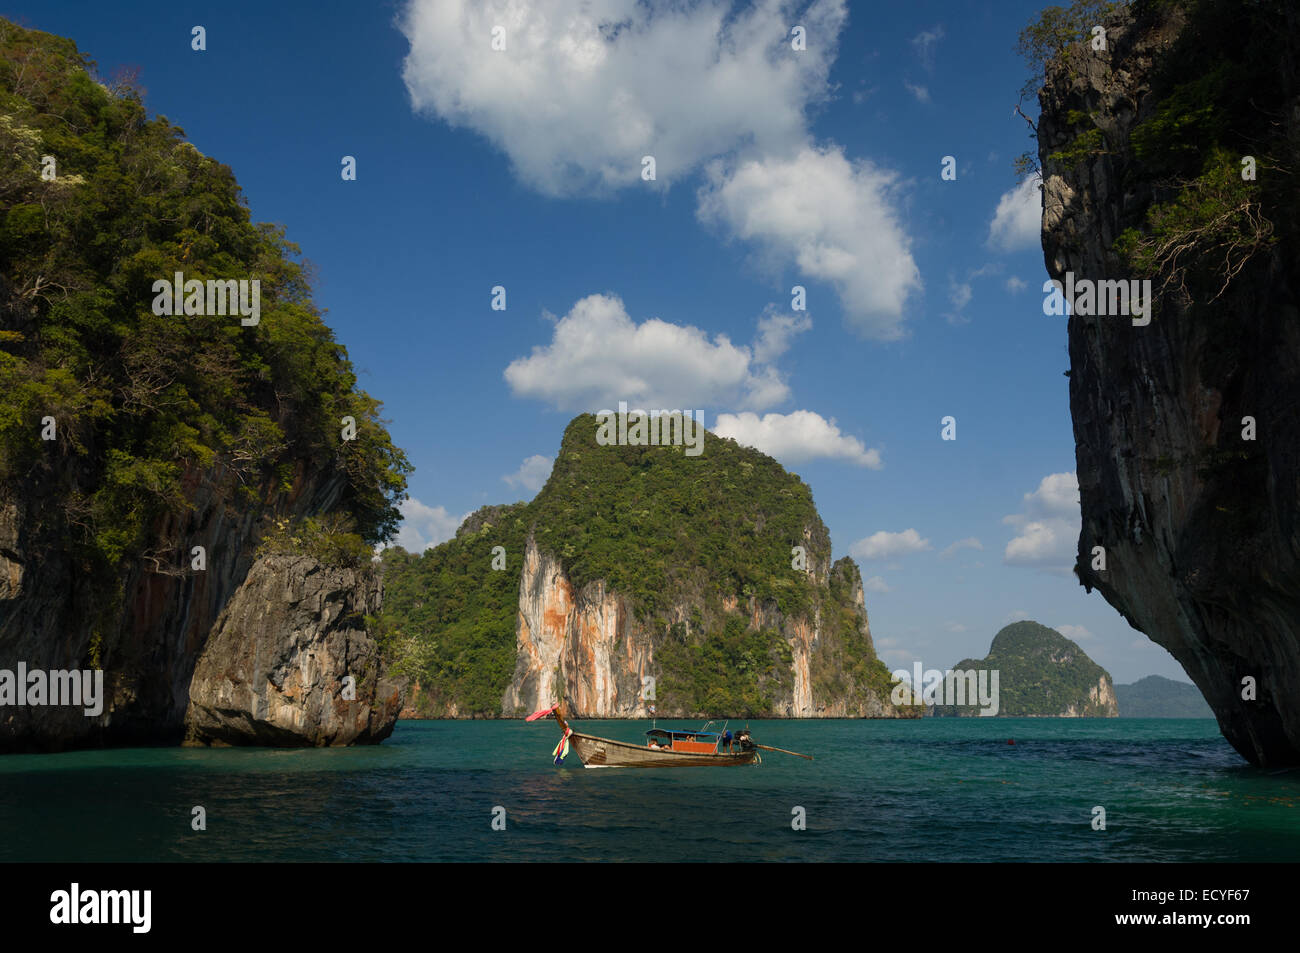 Tourists in a traditional Thai longtail fishing boat, moored between limestone rock formations, Phang Nga Bay, near Krabi, Thailand Stock Photo